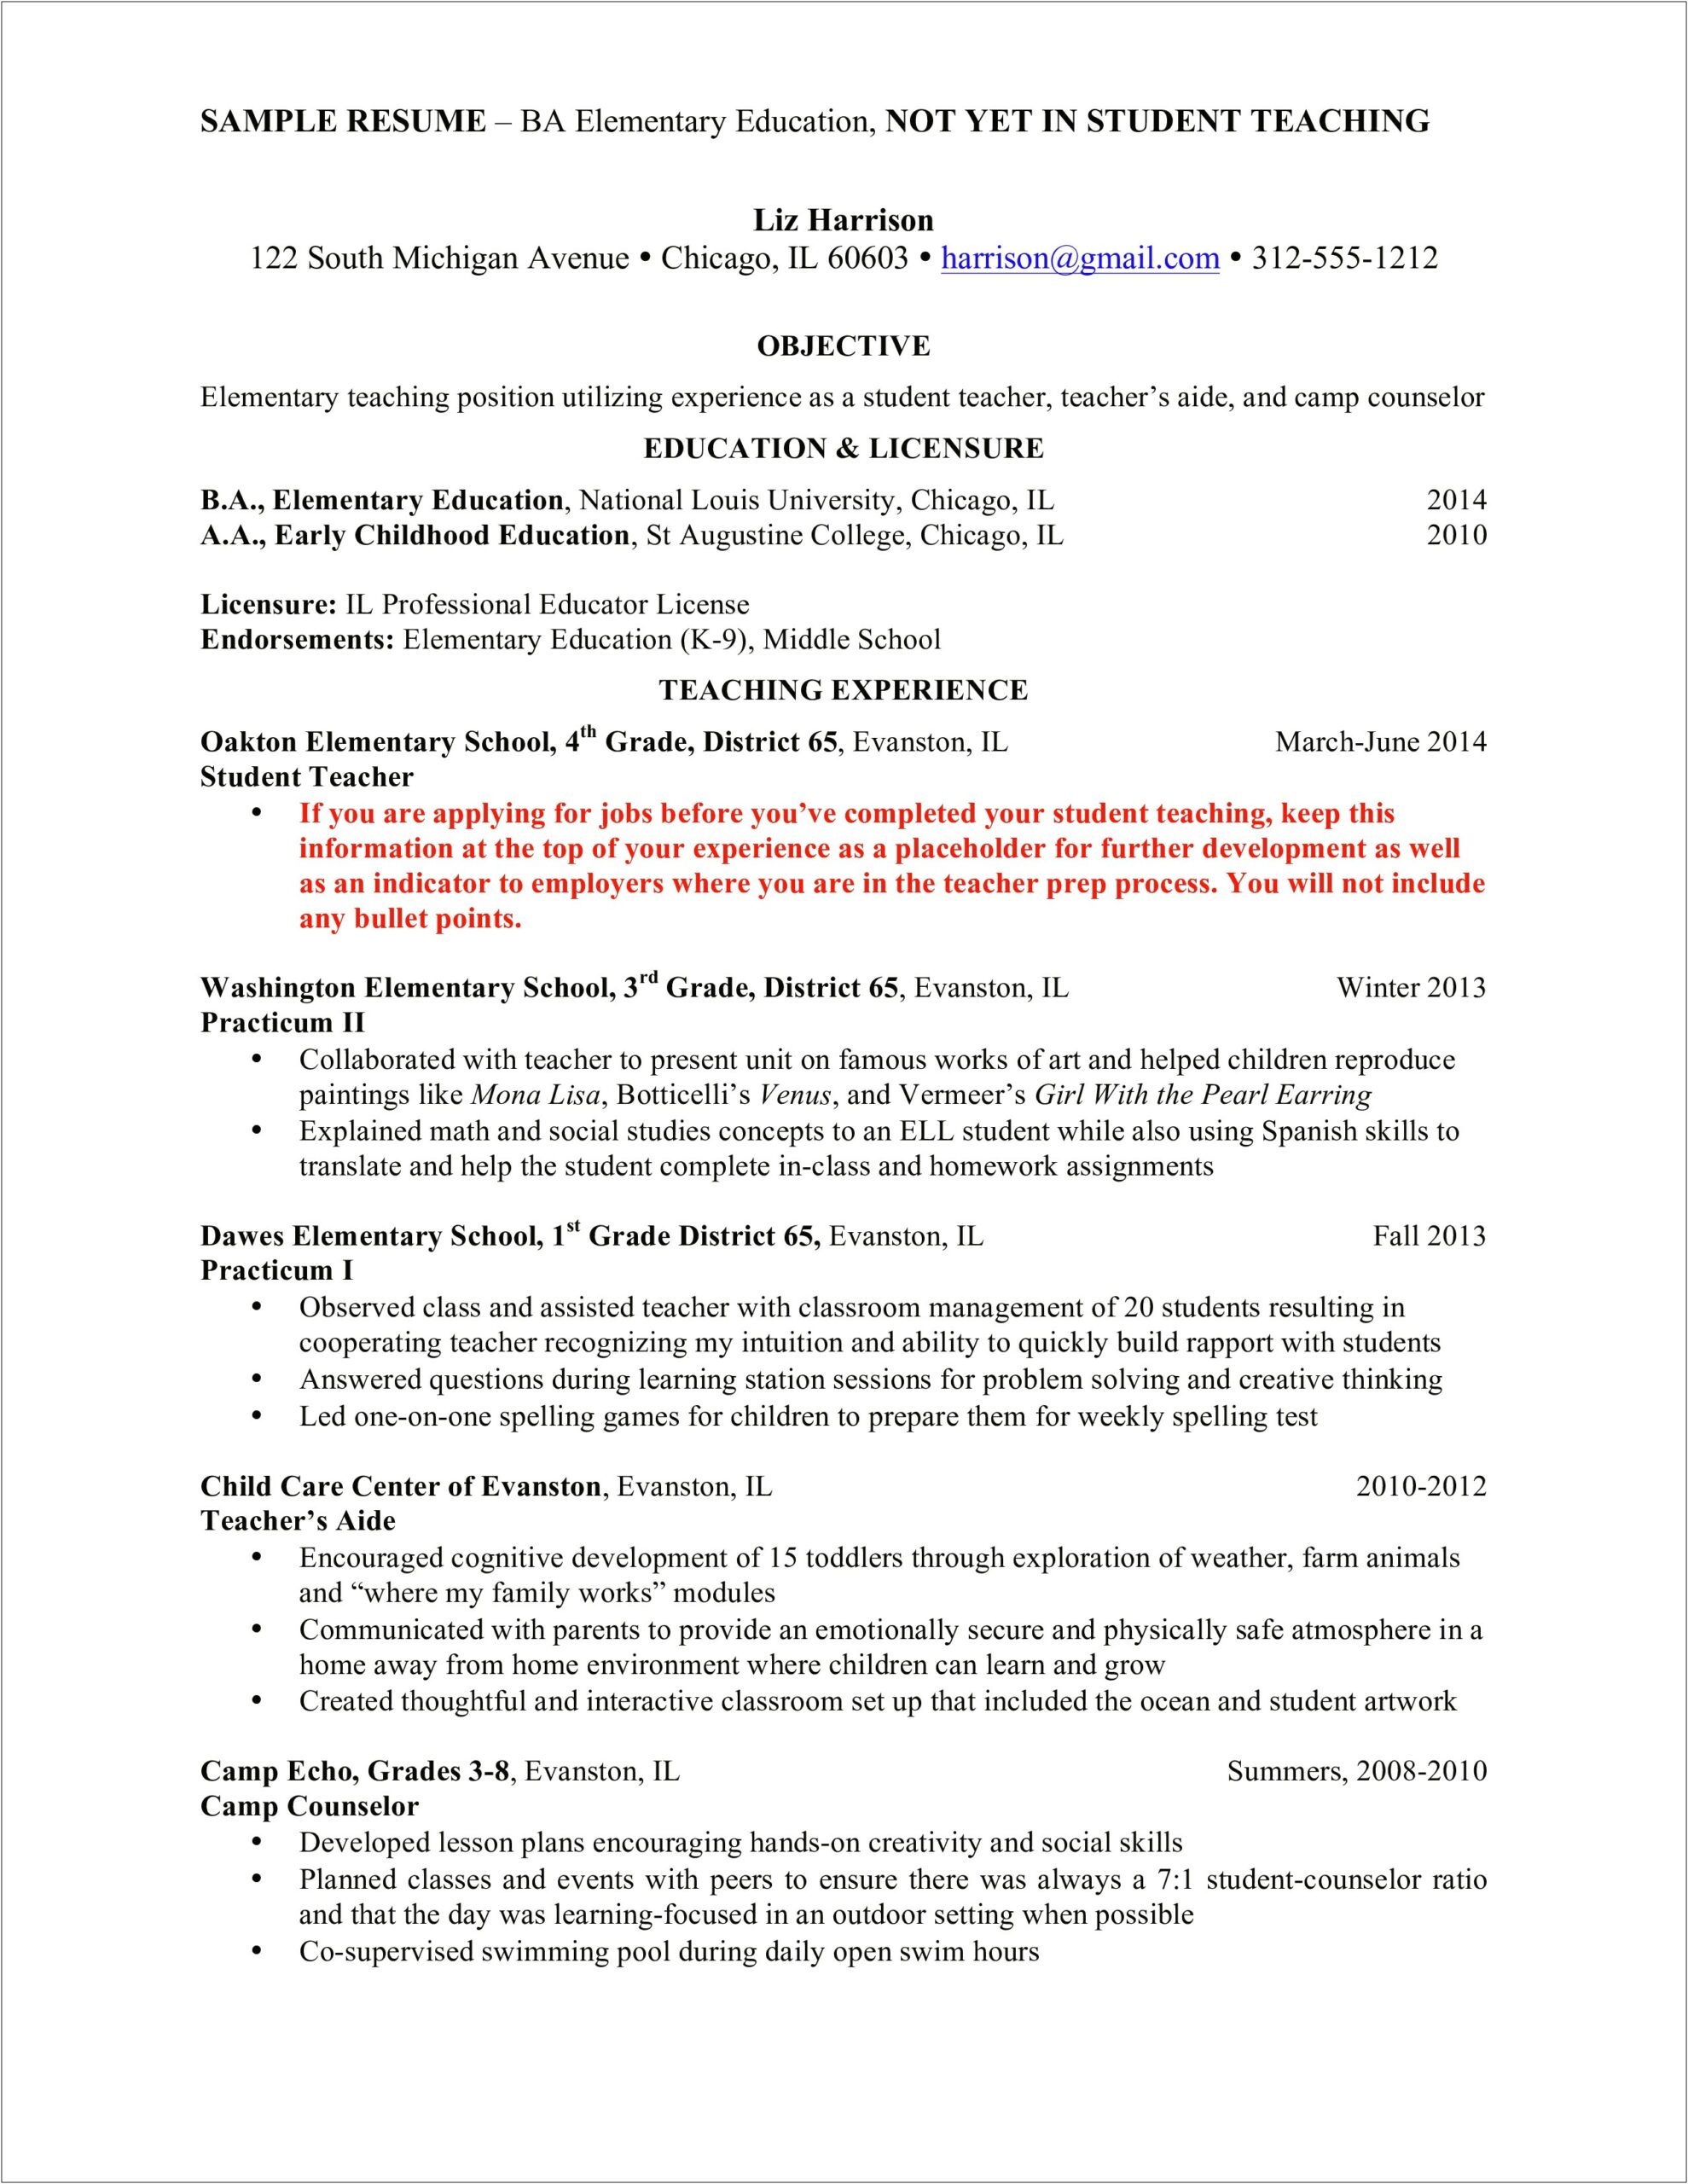 Sample Resume For Early Childhood